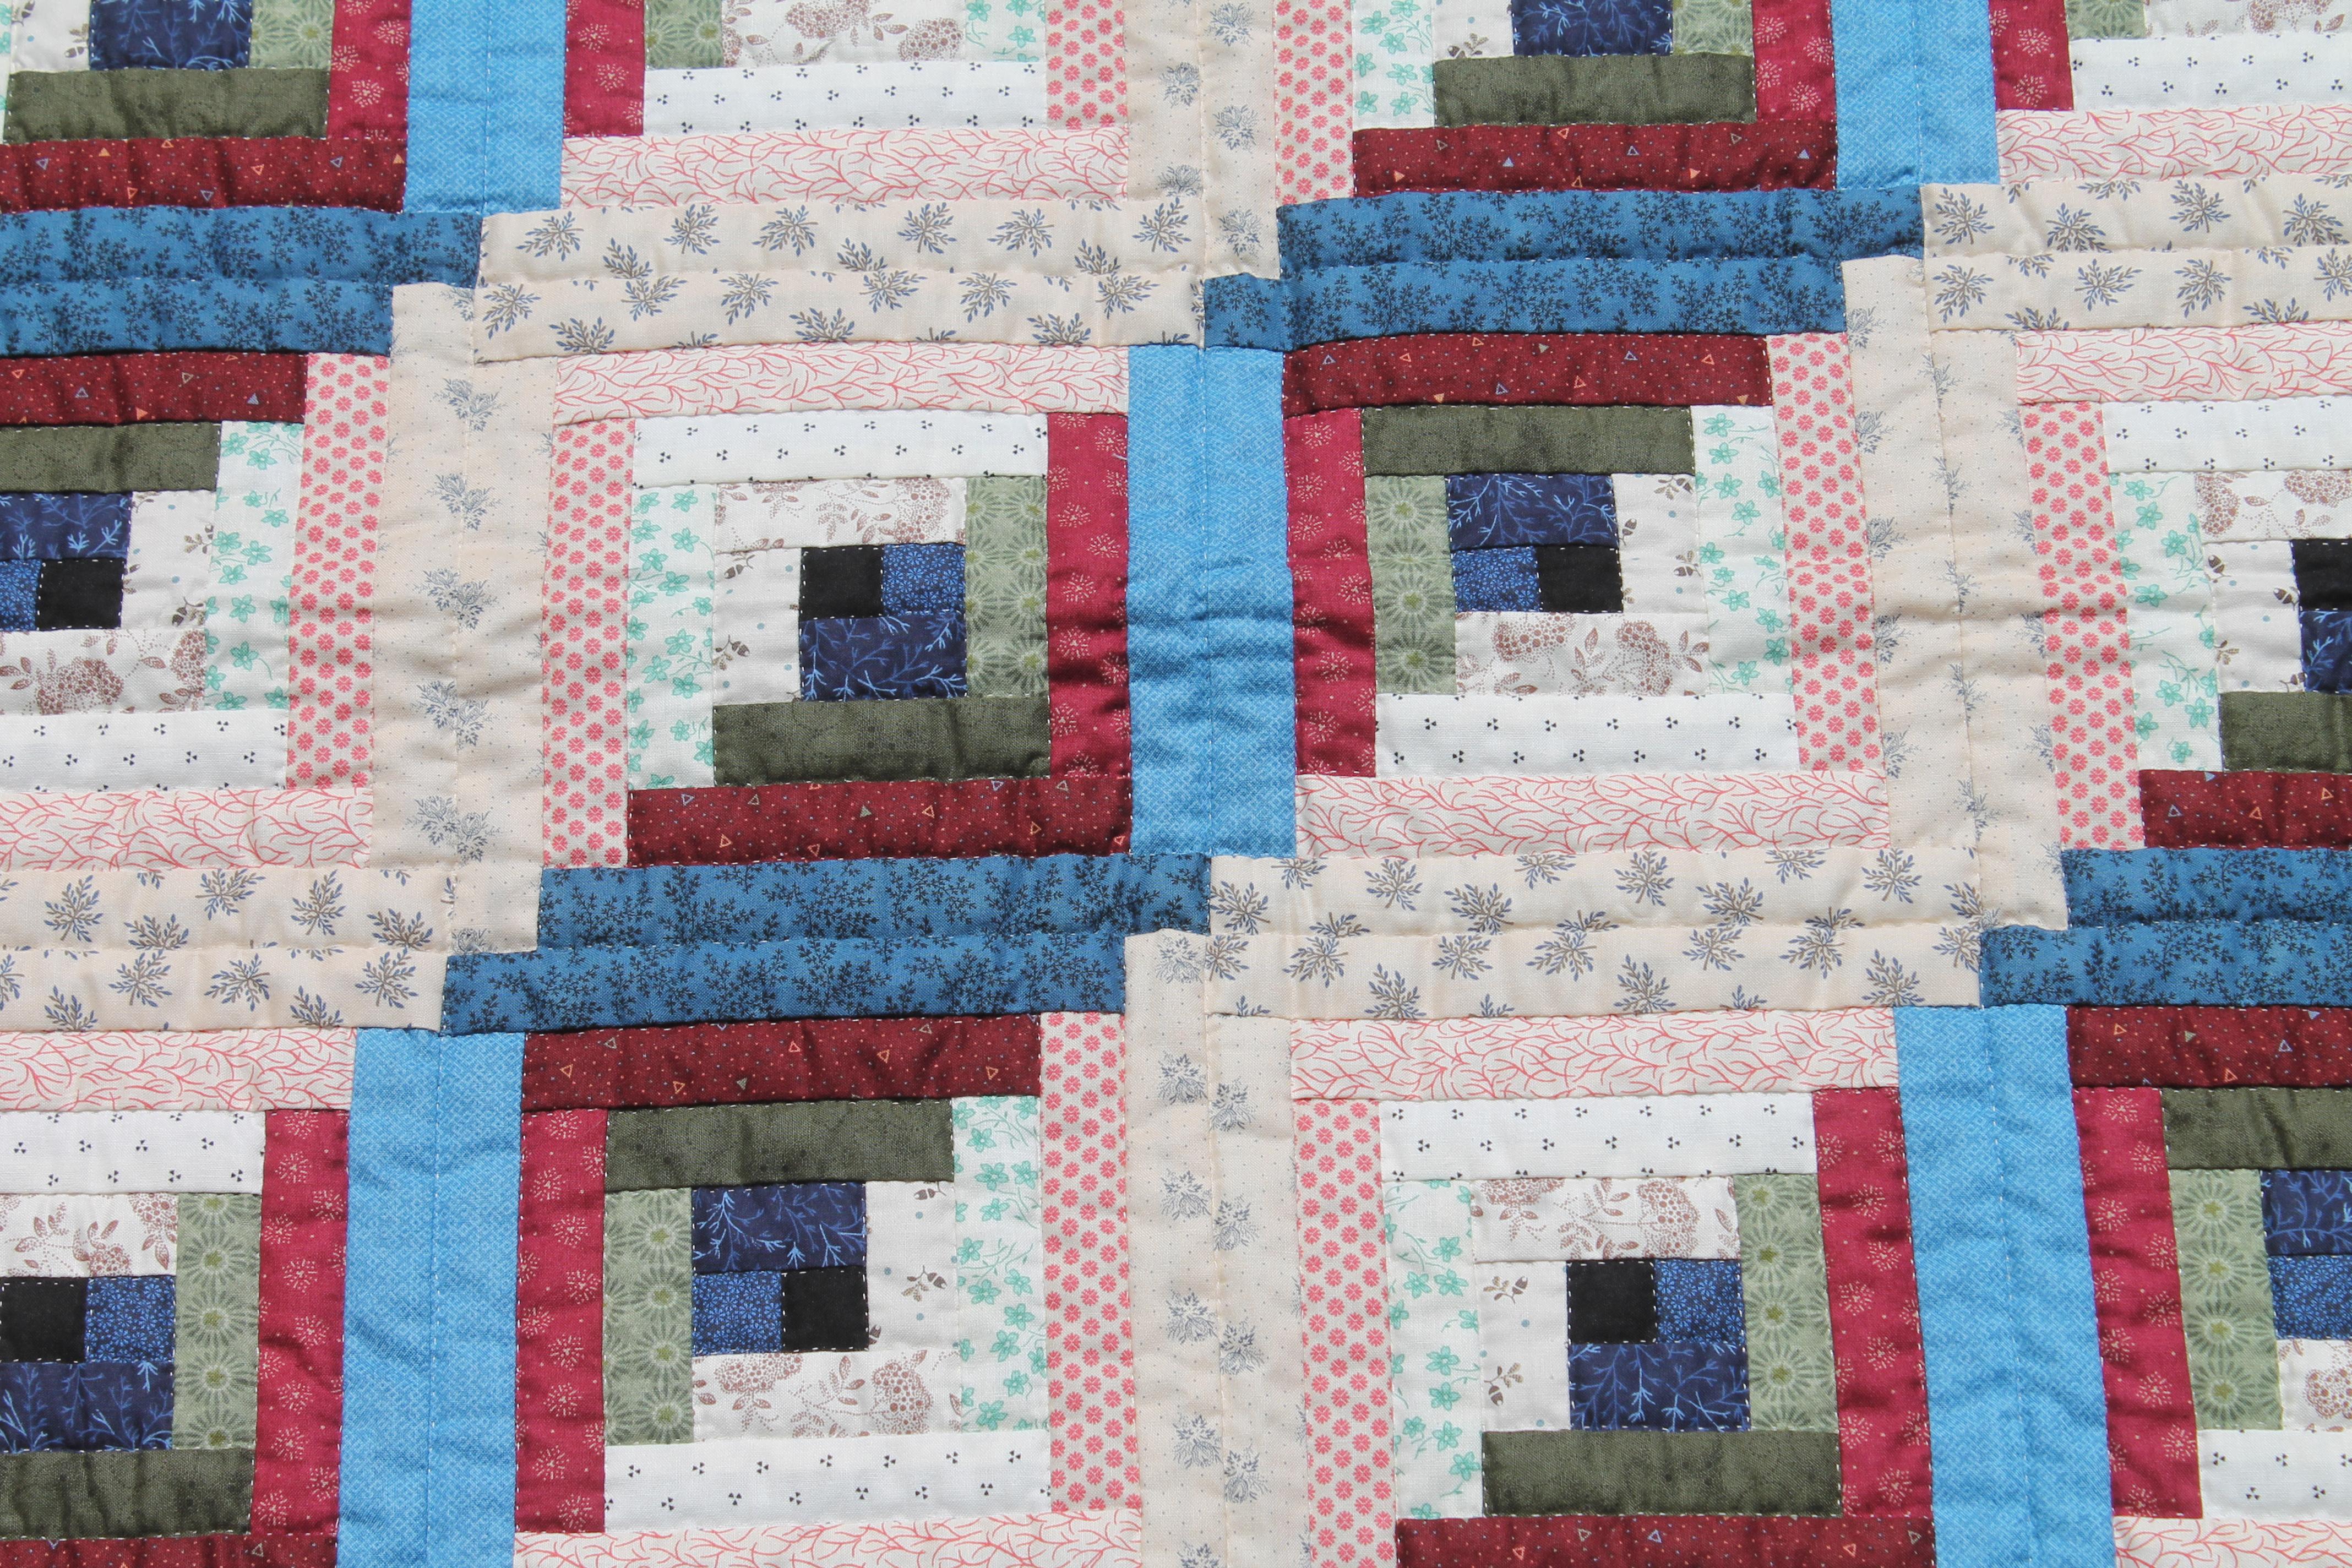 This finely pieced and quilted crib quilt was found in Lancaster County, Pennsylvania and is in pristine condition. The fine calico fabrics are really wonderful. This quilt has never been laundered.